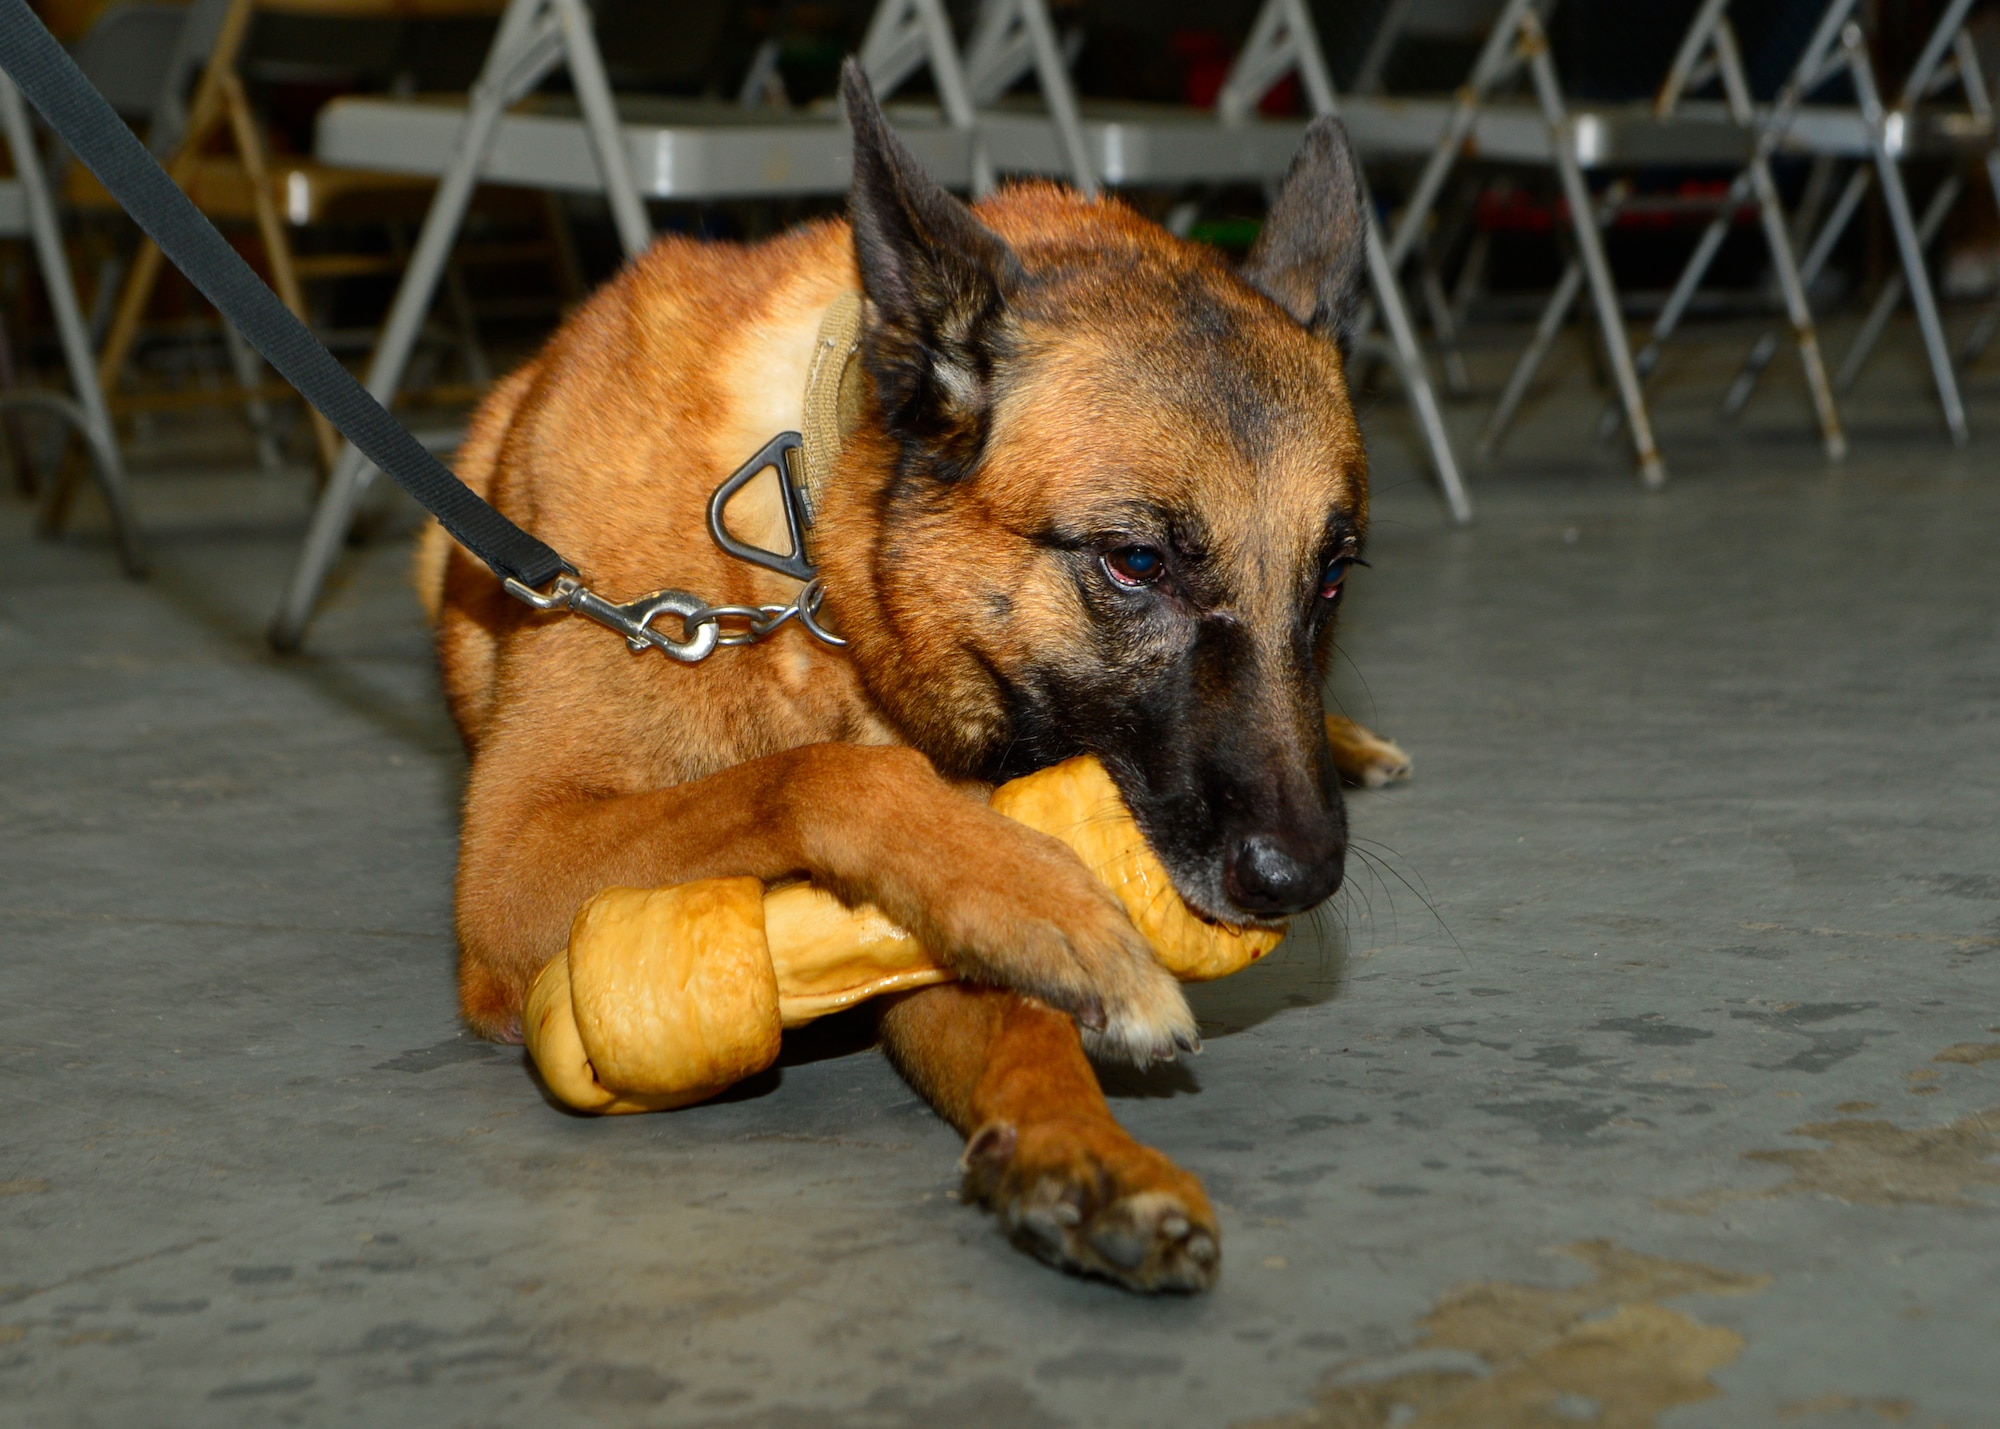 Renzo, 436th Security Force Squadron military working dog, chews on a rawhide bone after his retirement ceremony Nov. 10, 2014, at Dover Air Force Base, Del. Renzo was honorably discharged Nov. 5, 2014, after serving eight years with the 436th SFS and was adopted by former 436th SFS MWD handler, Staff Sgt. Tatiana Carbocci. (U.S. Air Force photo/Airman 1st Class William Johnson)